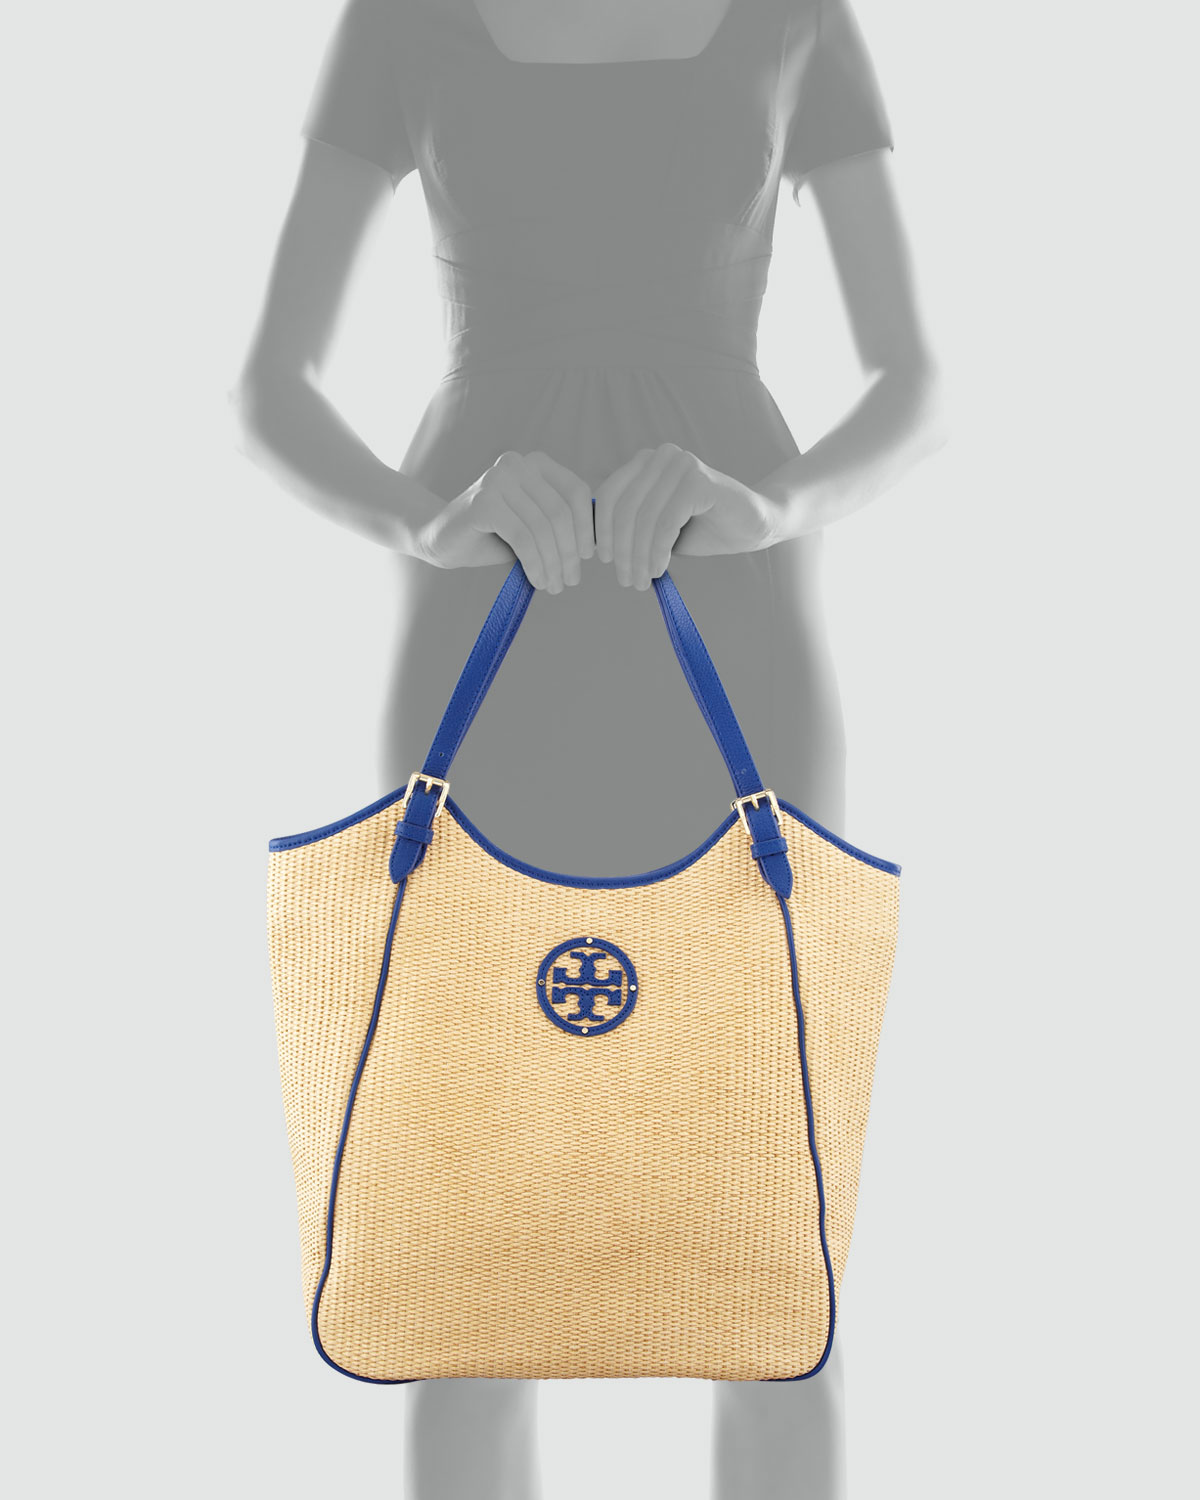 Lyst - Tory Burch Large Slouchy Straw Tote Bag in Natural